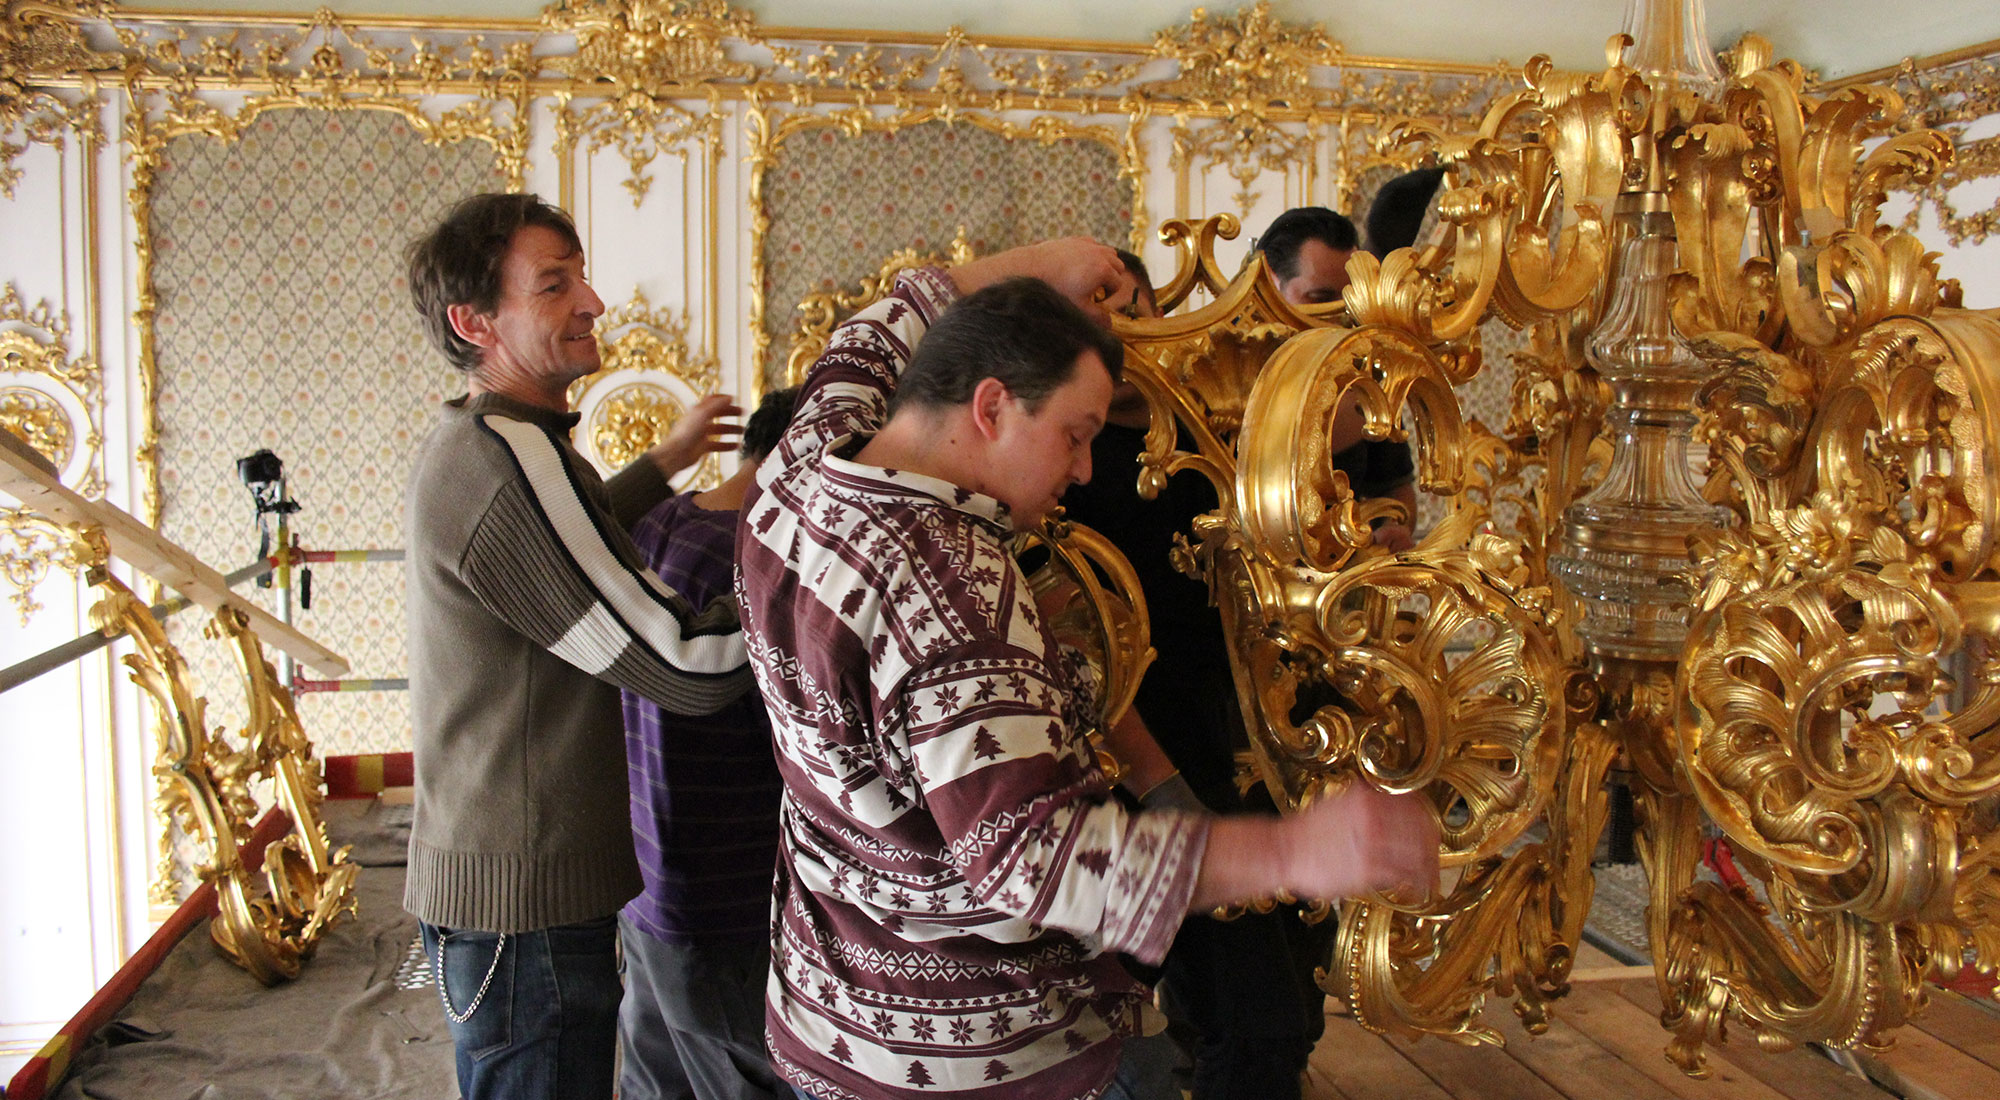 Massive cast and gilded brass parts being attached on the chandelier